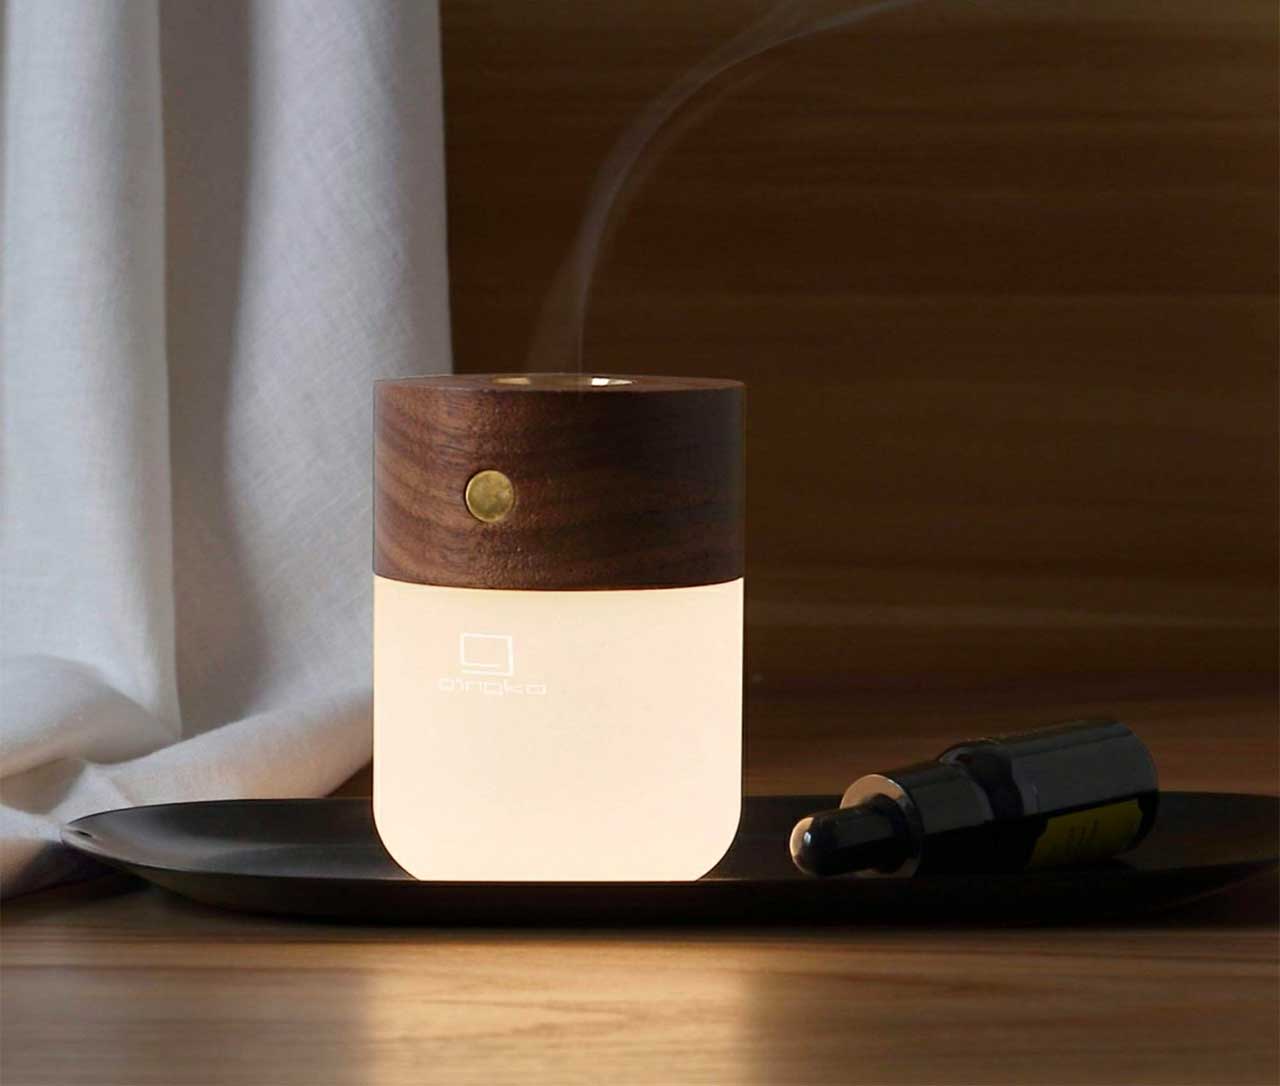 Gingko’s New Smart Diffuser Lamp Will Excite Your Senses of Sight + Smell